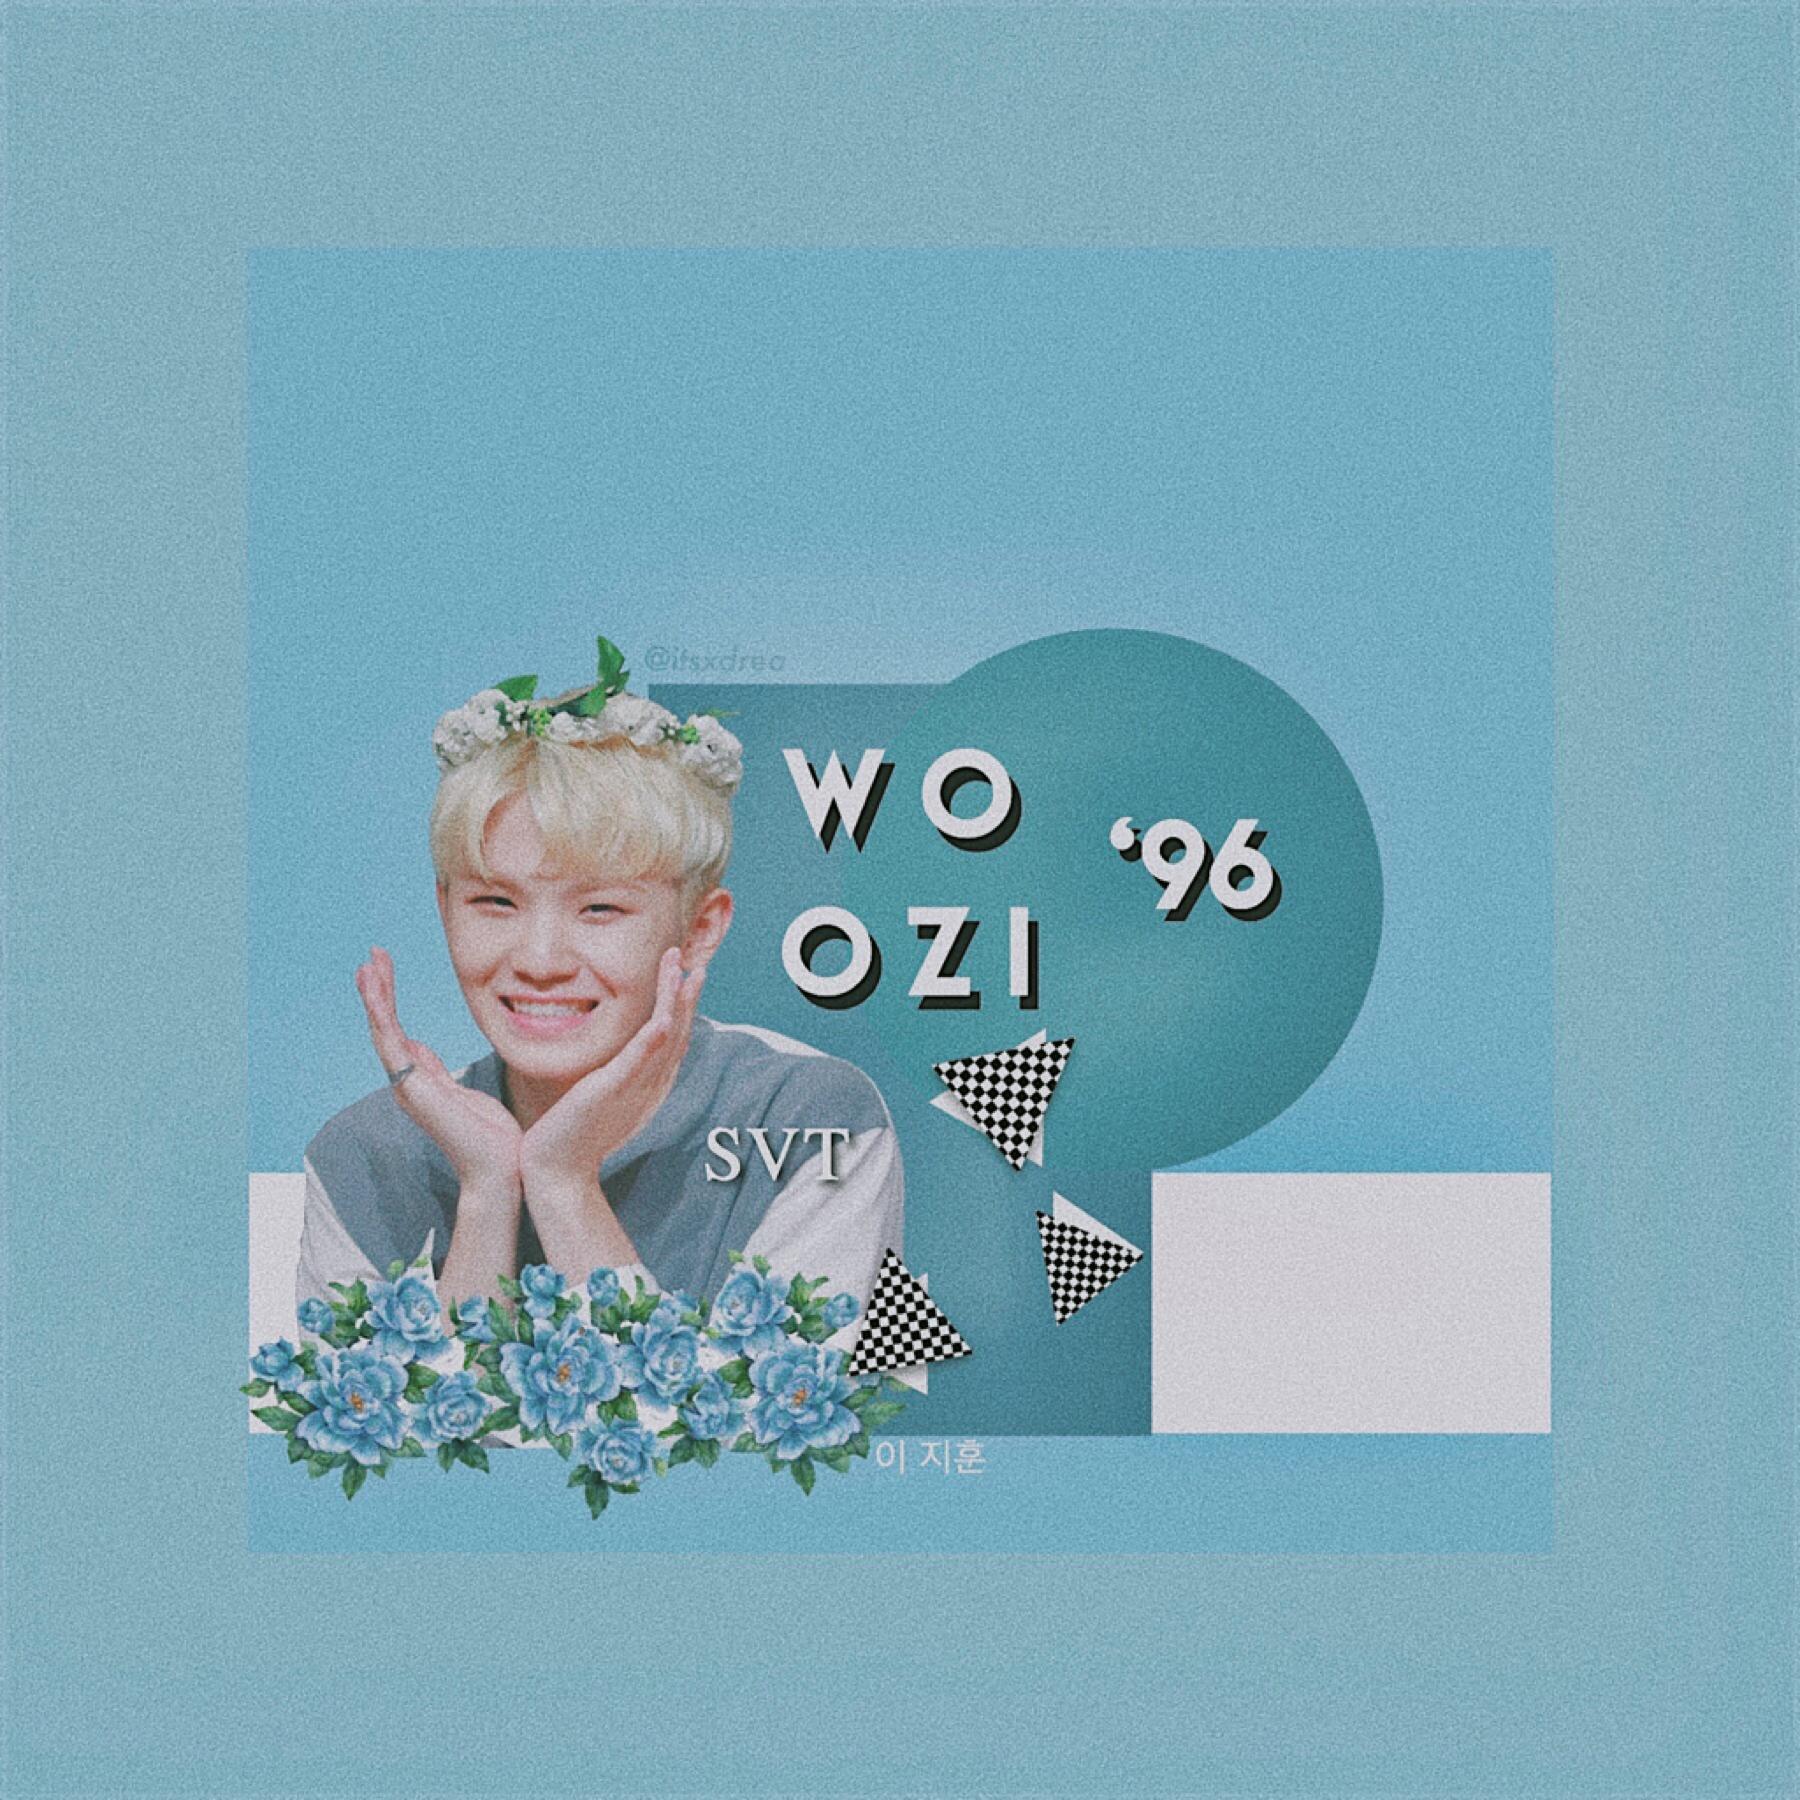 🧚
• woozi // svt •
> edit request for @stariicloud <
STOP I JUST FINISHED MY FIRST DAY OF SCHOOL AND LEMME TELL YOU, I WILL BE PASSING 😀